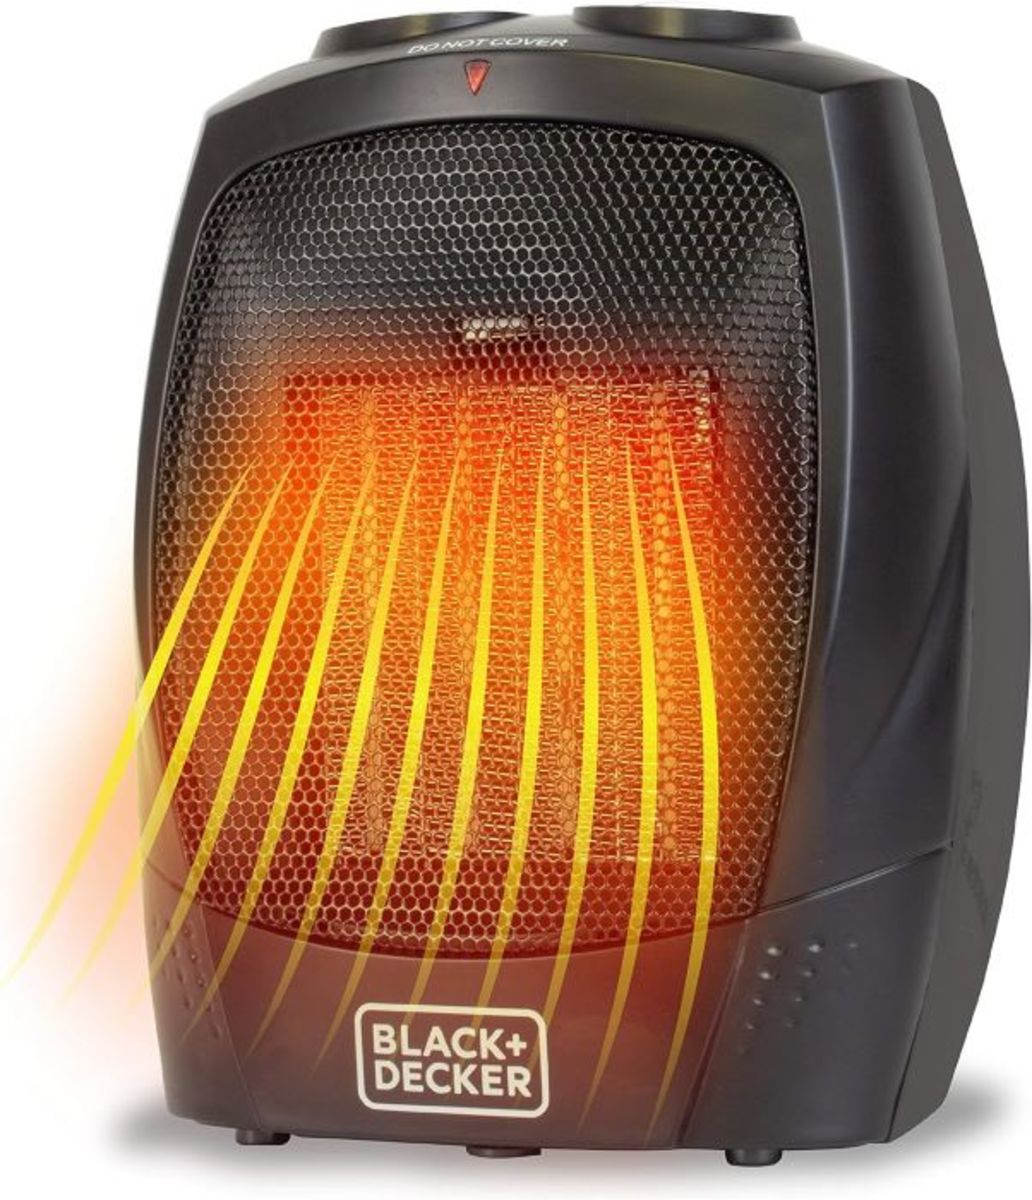 GiveBest Portable Electric Space Heater review — TODAY